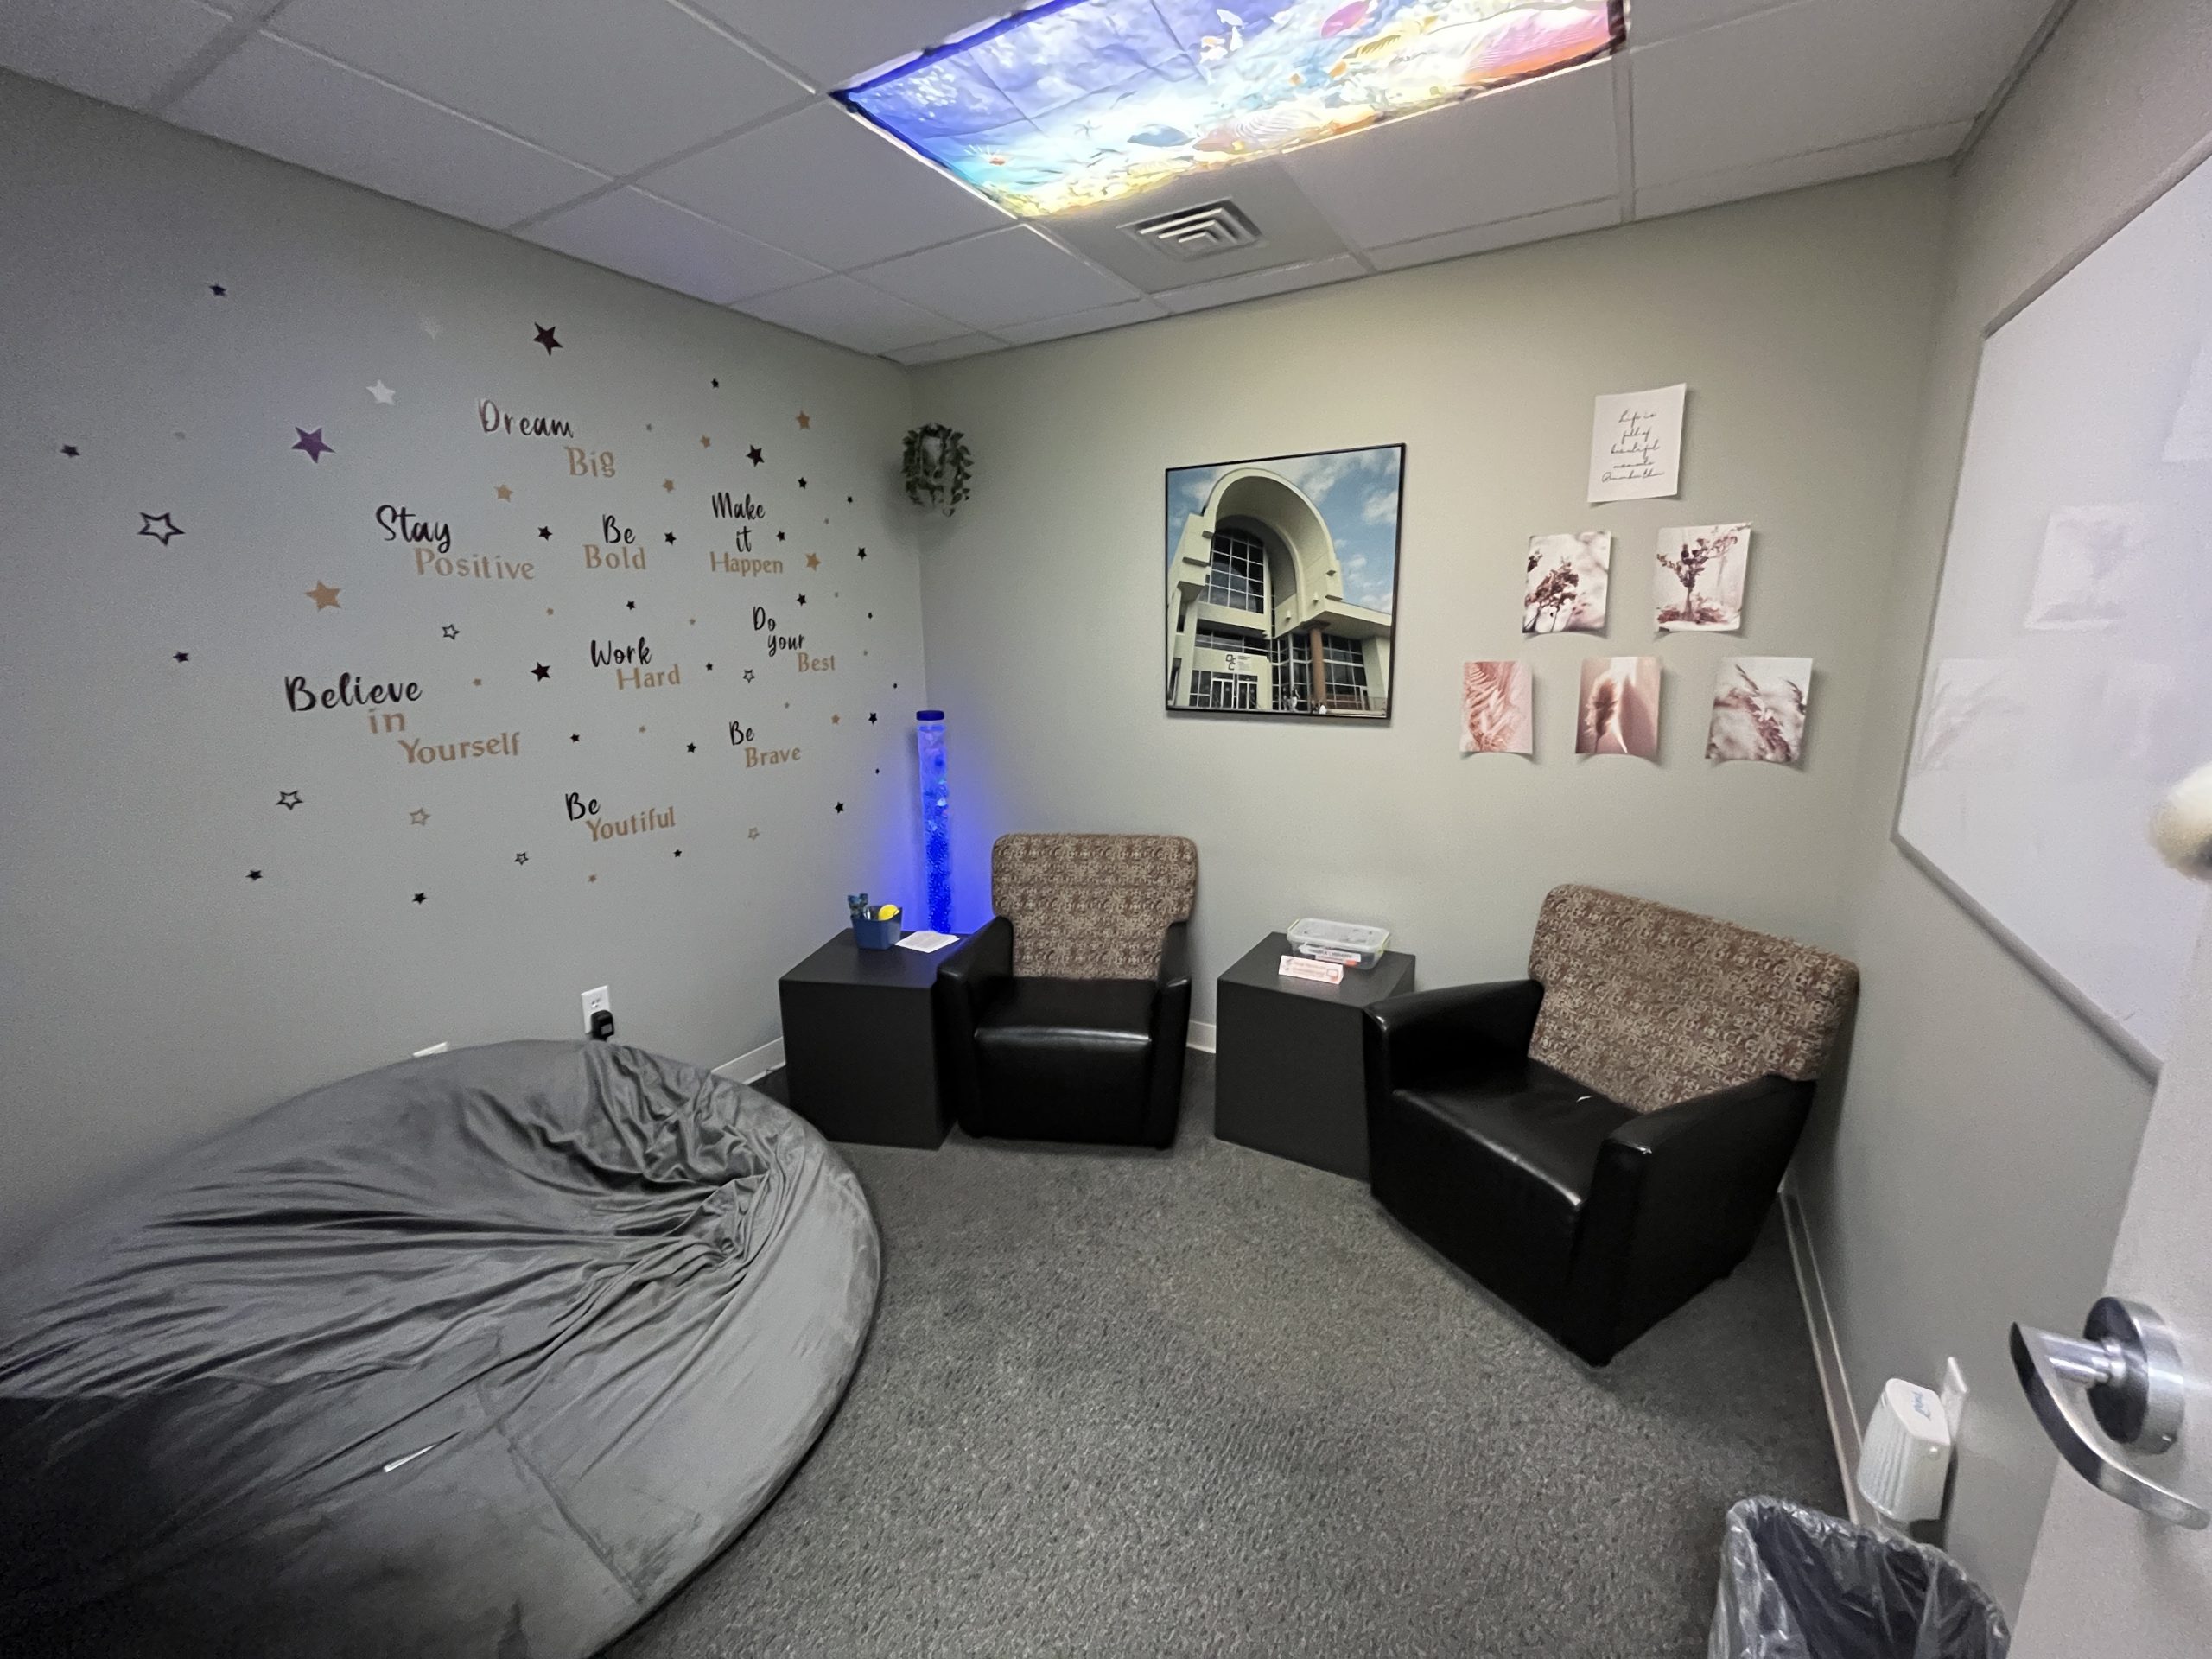 Photo of IC 100, a small study room with bean bag, soft seating, and soft lighting